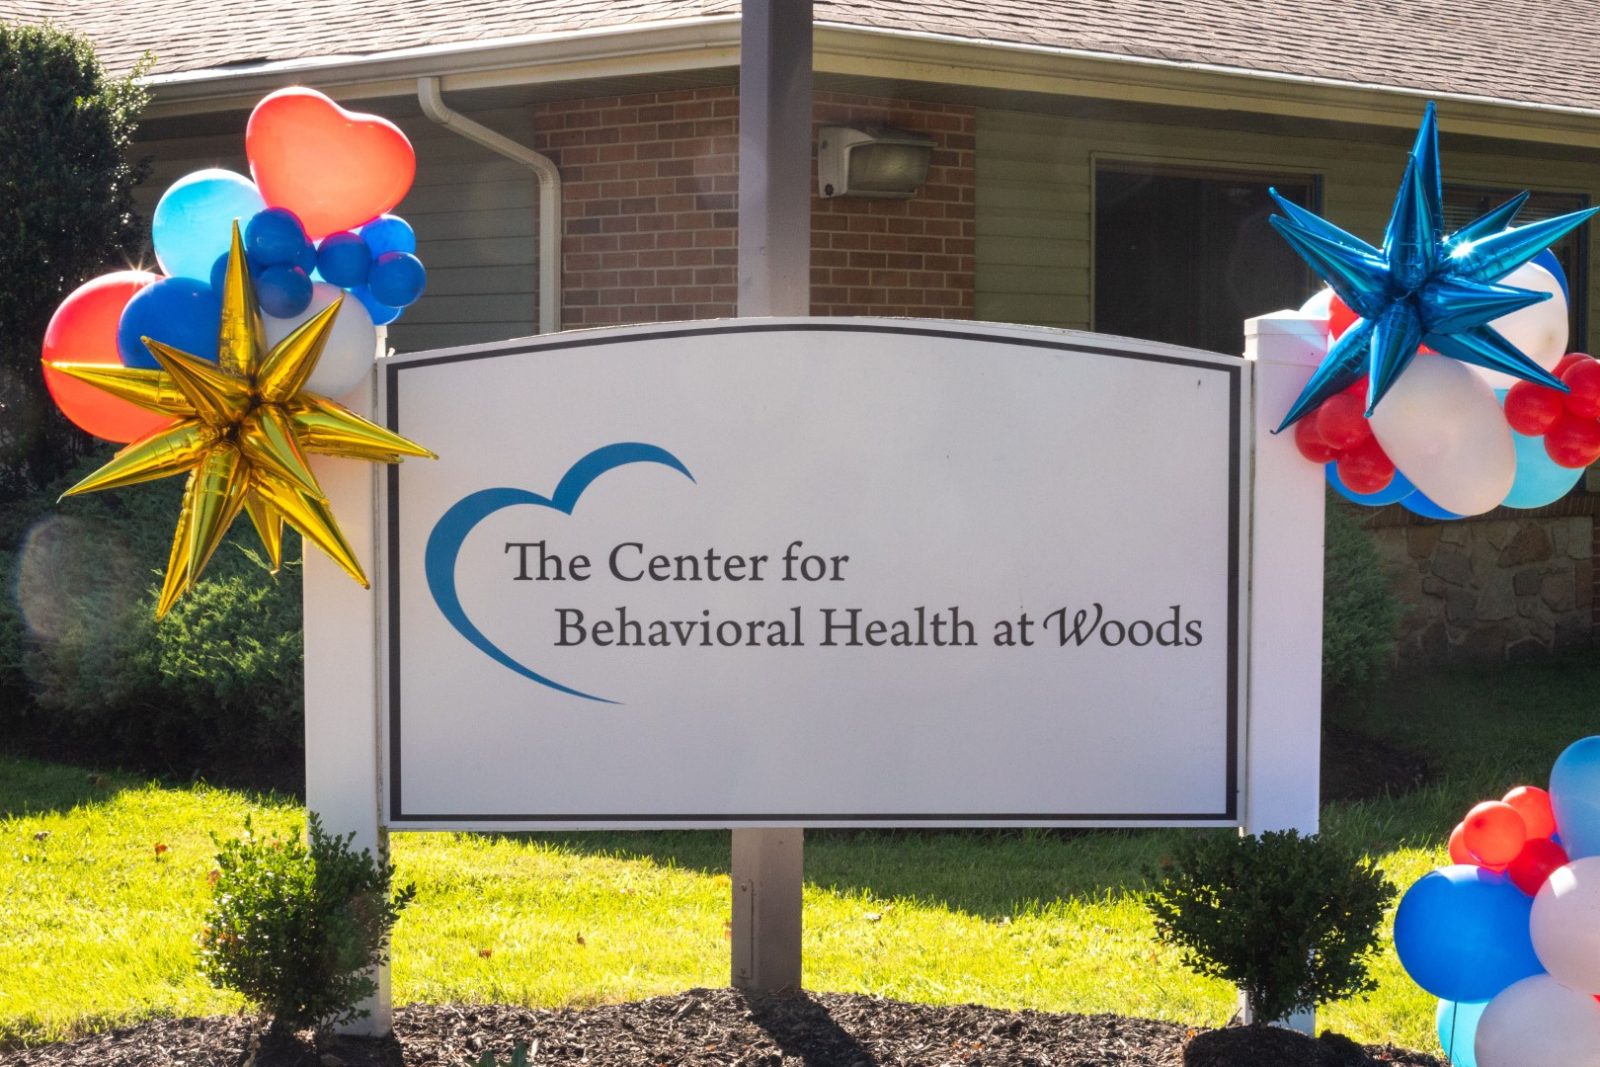 Sign for The Center for Behavioral Health at Woods, a site of inclusive healthcare, decorated with balloons.